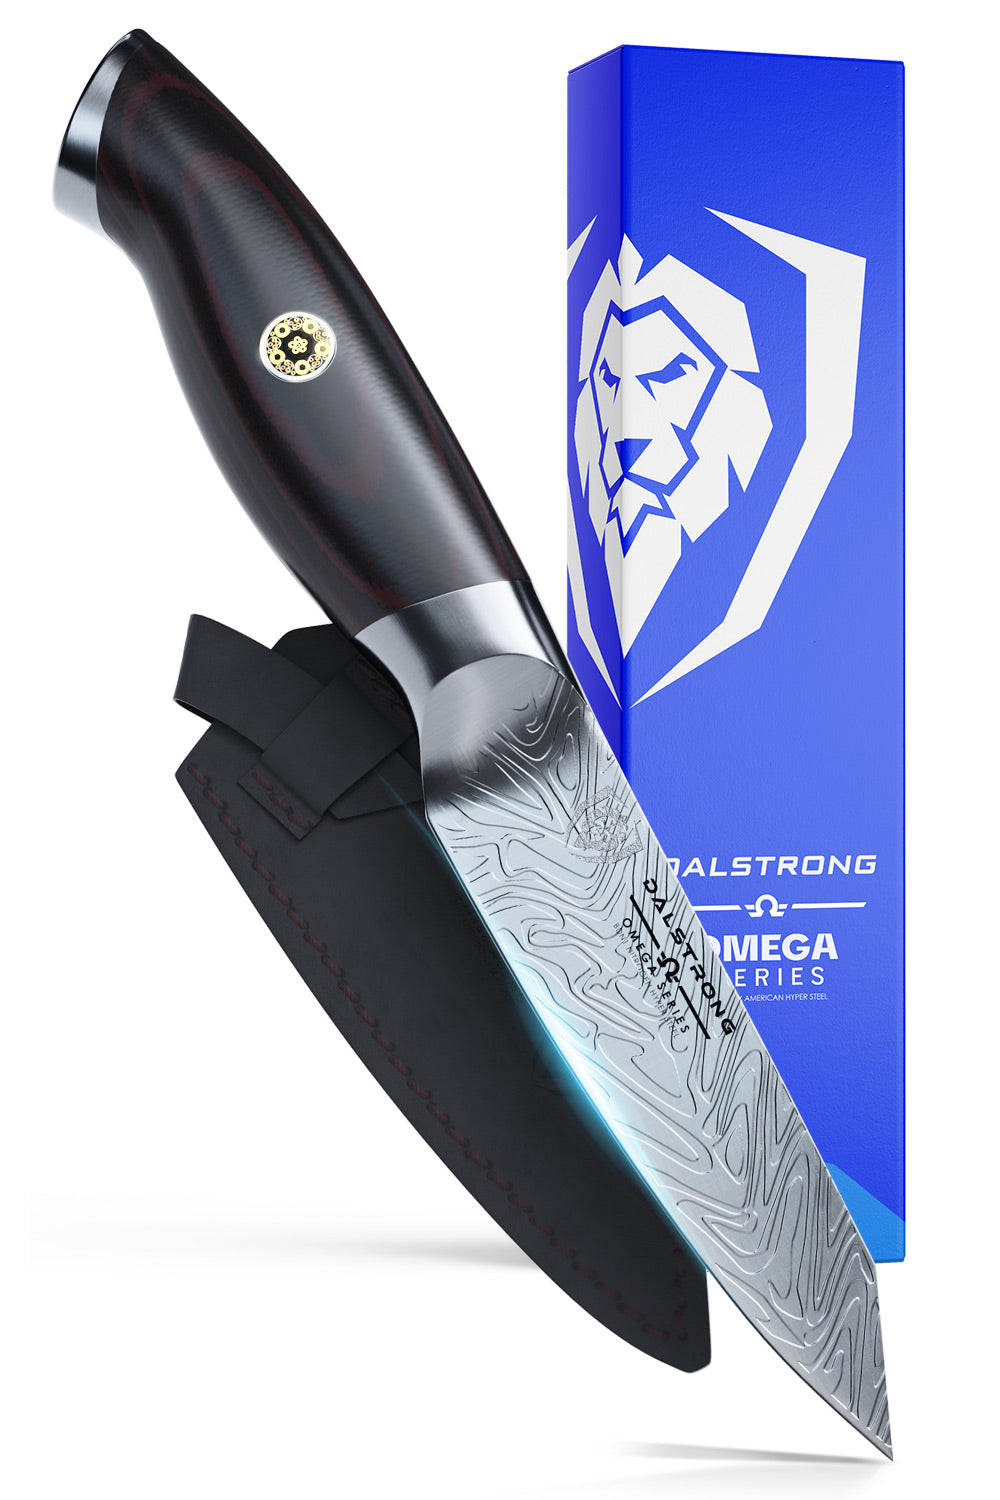 Dalstrong omega series 4 inch paring knife in front of it's premium packaging.